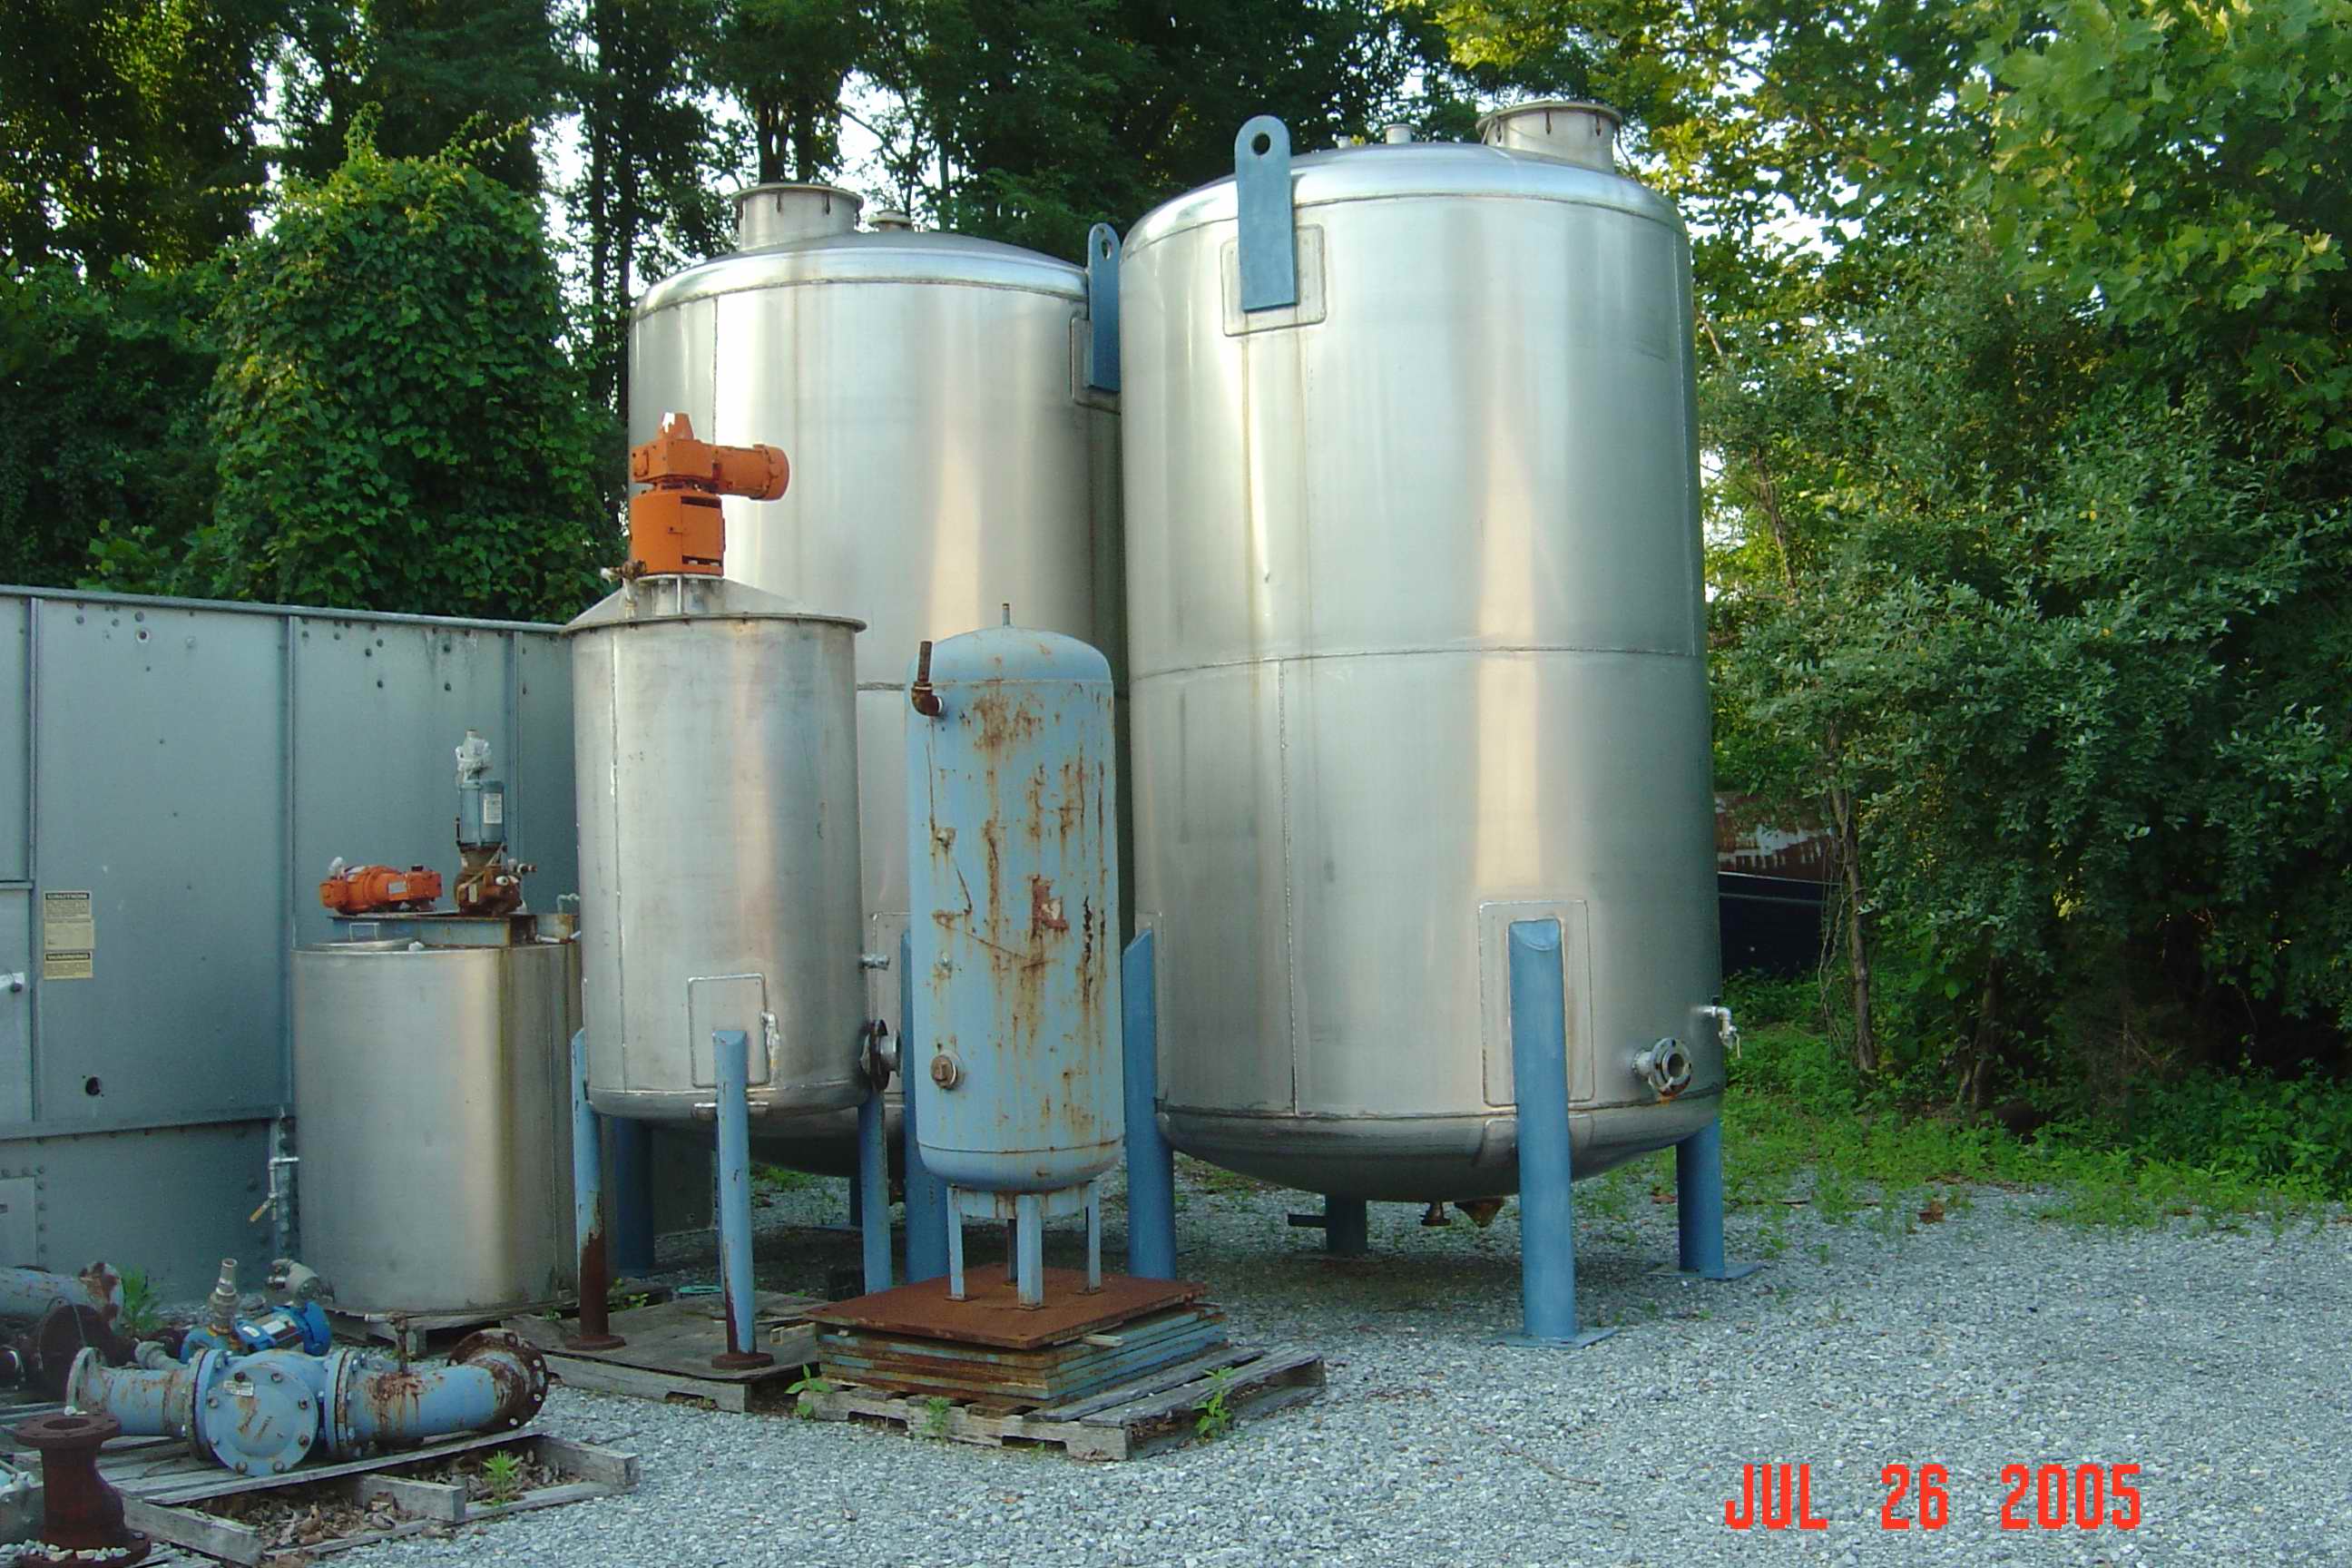 350 Gallon Stainless Steel Vertical Tank, 48" Dia. X 48" Straight Side